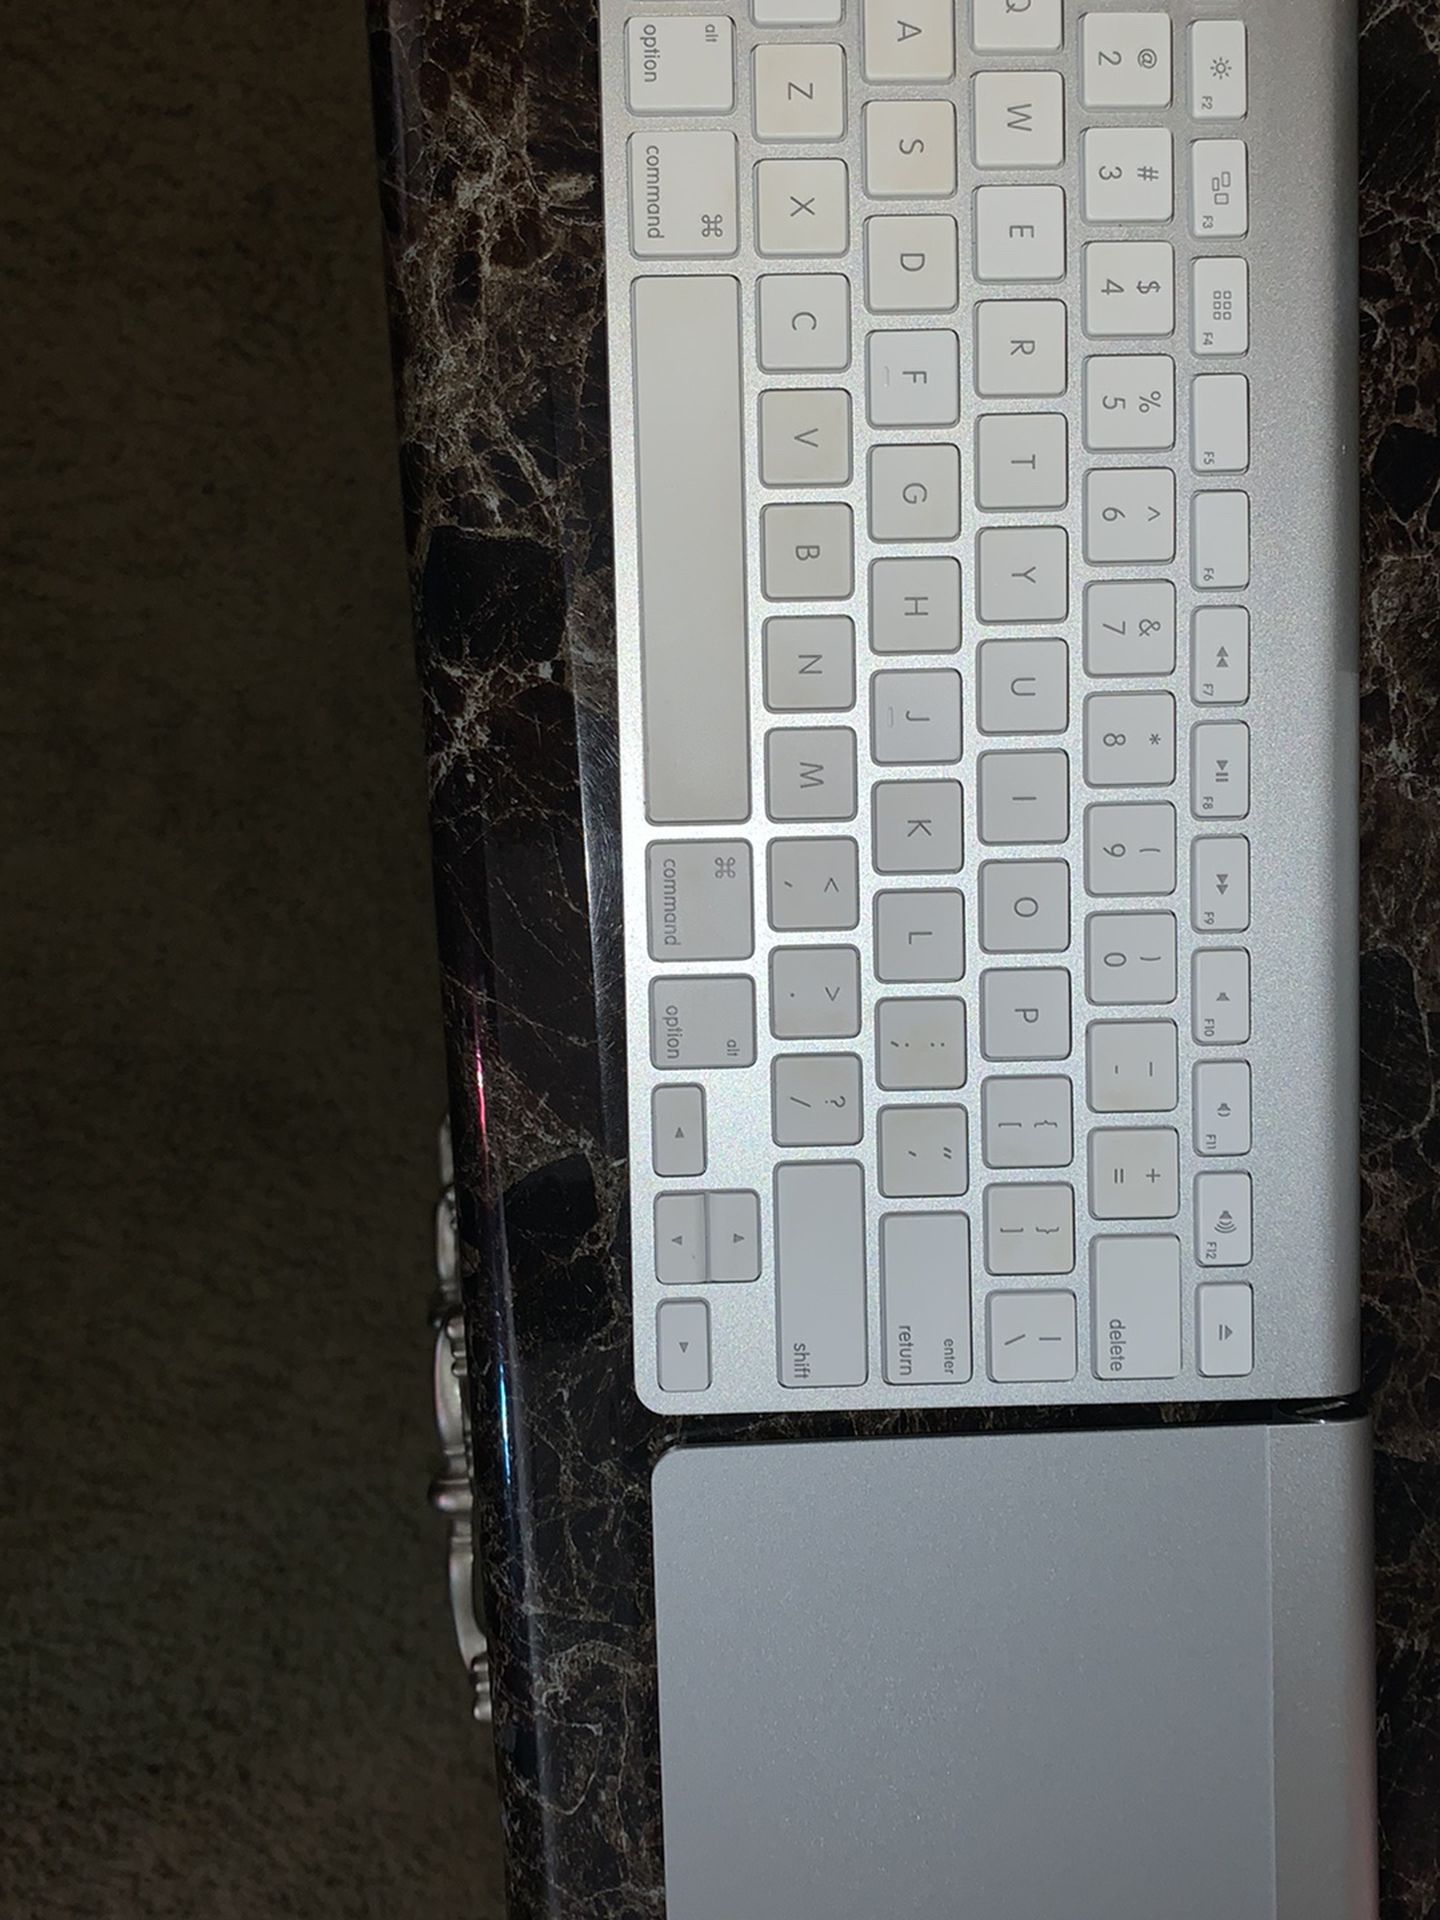 Apple Desk Top Keyboard With Mouse